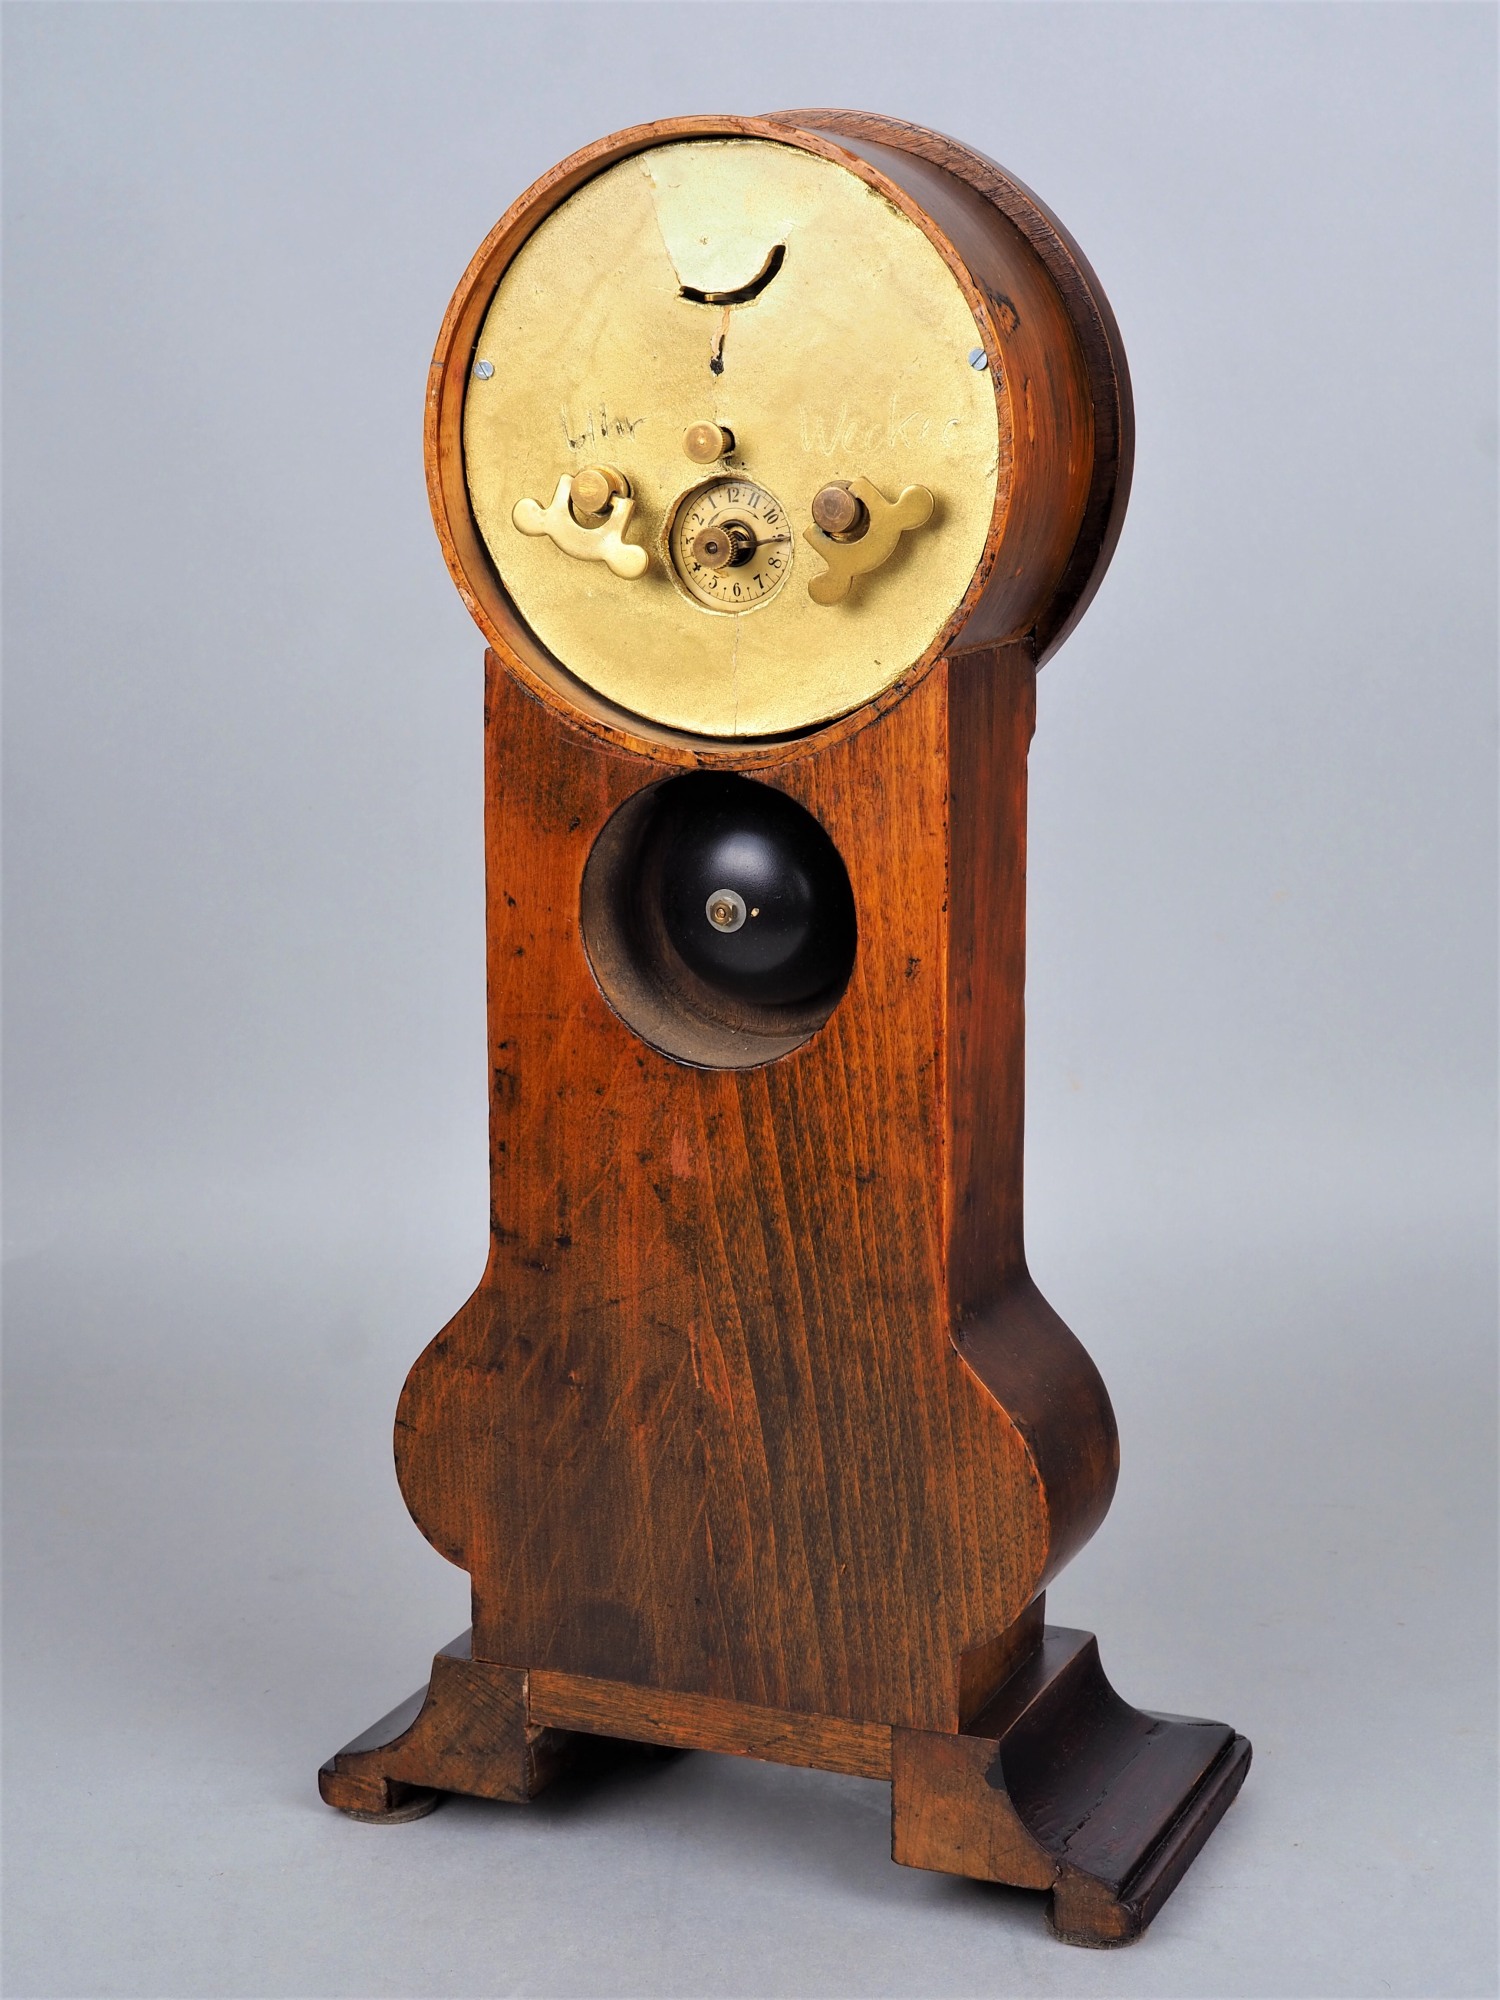 Miniature grandfather clock "Junghans" around 1900 - Image 2 of 3